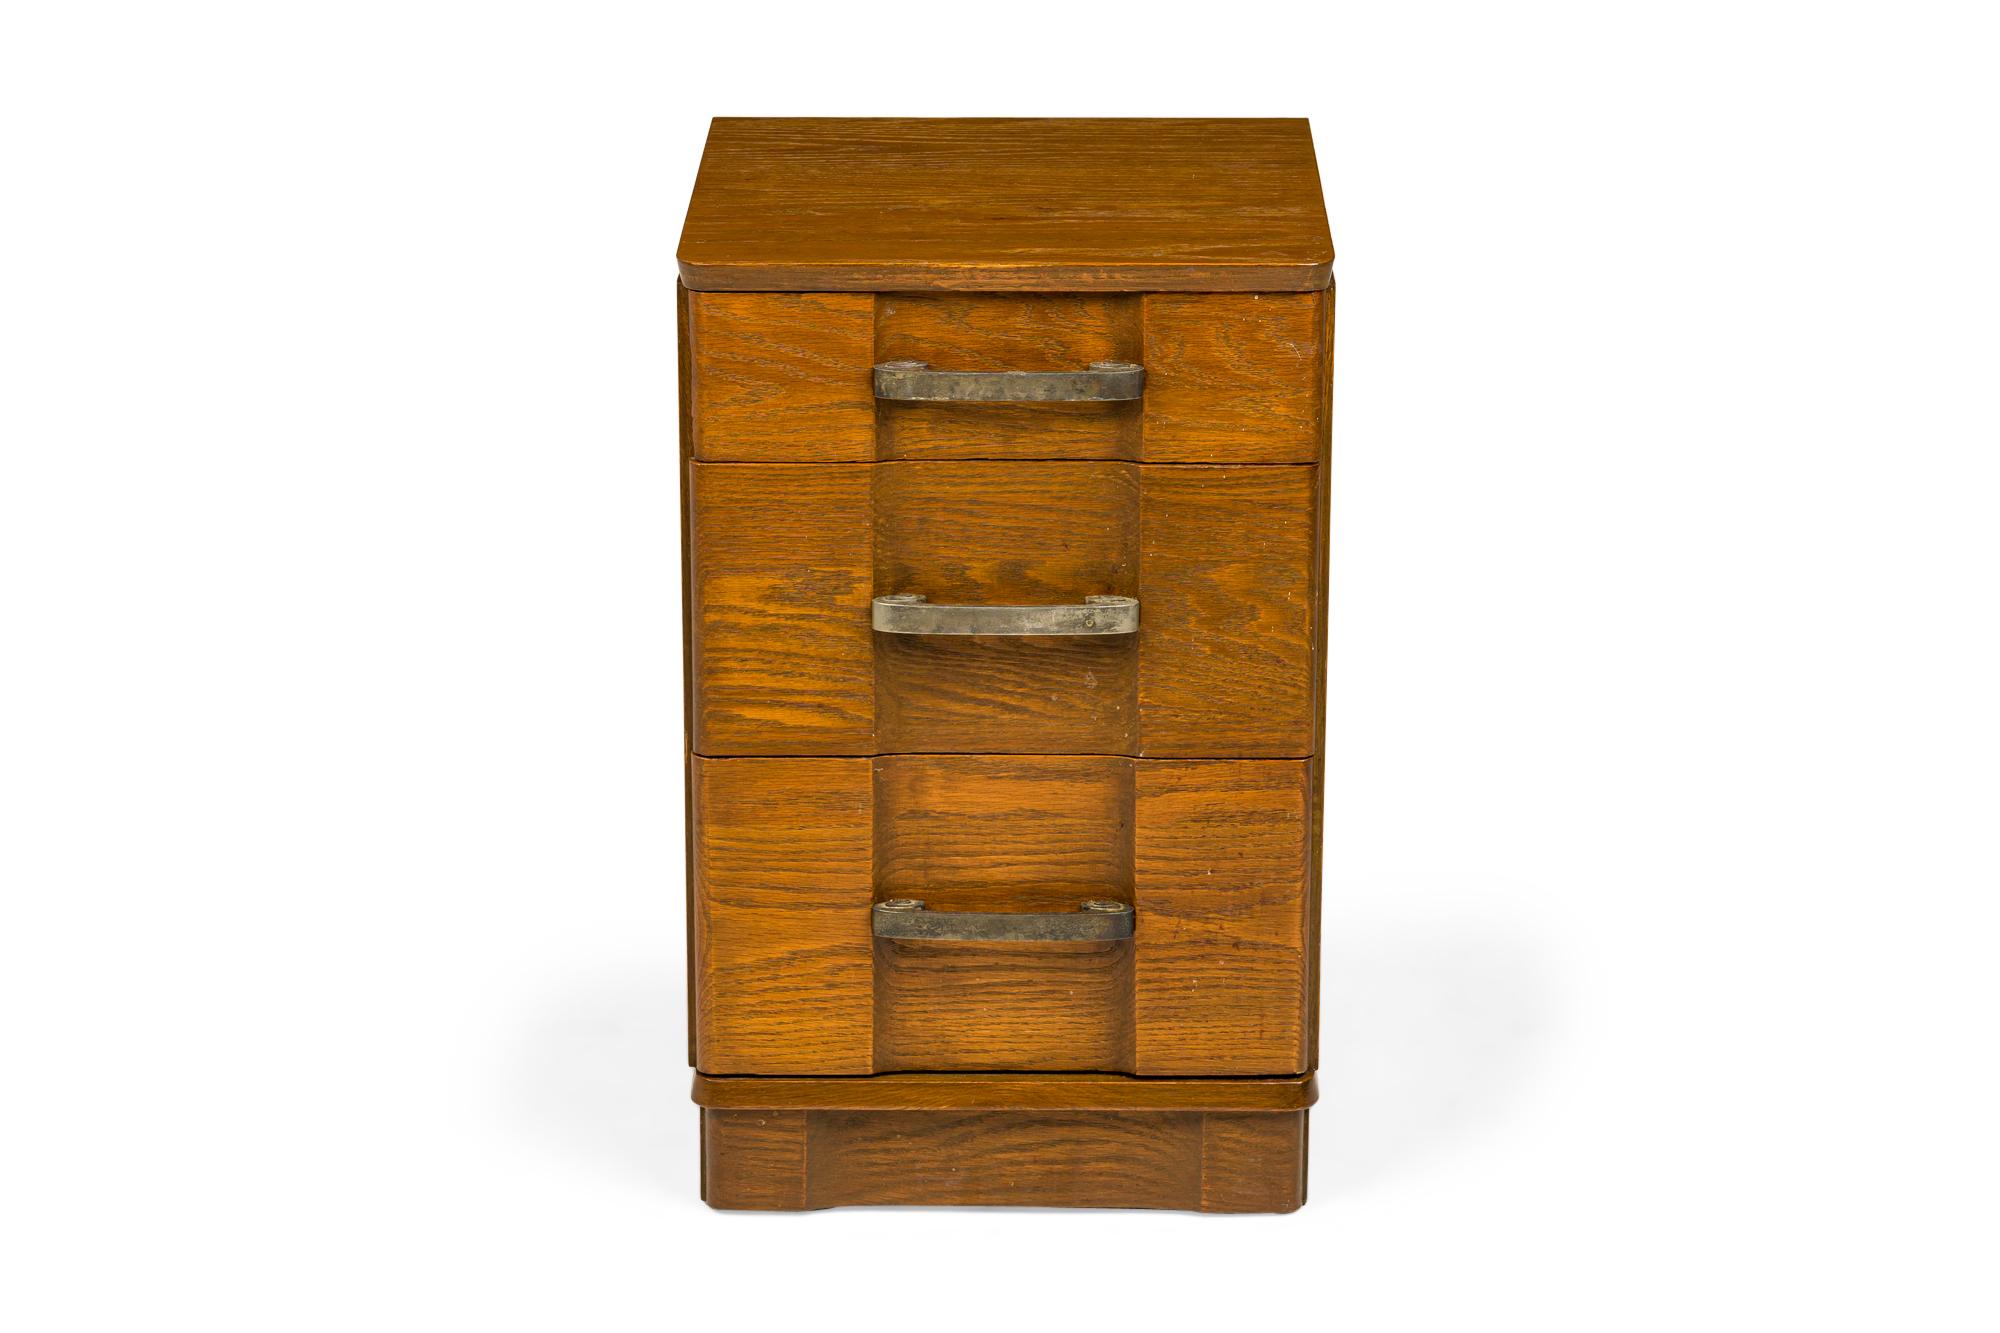 American Mid-Century bedside table / nightstand containing three drawers with recessed center fronts and scroll design brass drawer pulls in a dark stained wooden cabinet with rounded corners and a pedestal base. (MORGAN FURNITURE COMPANY)(Similar